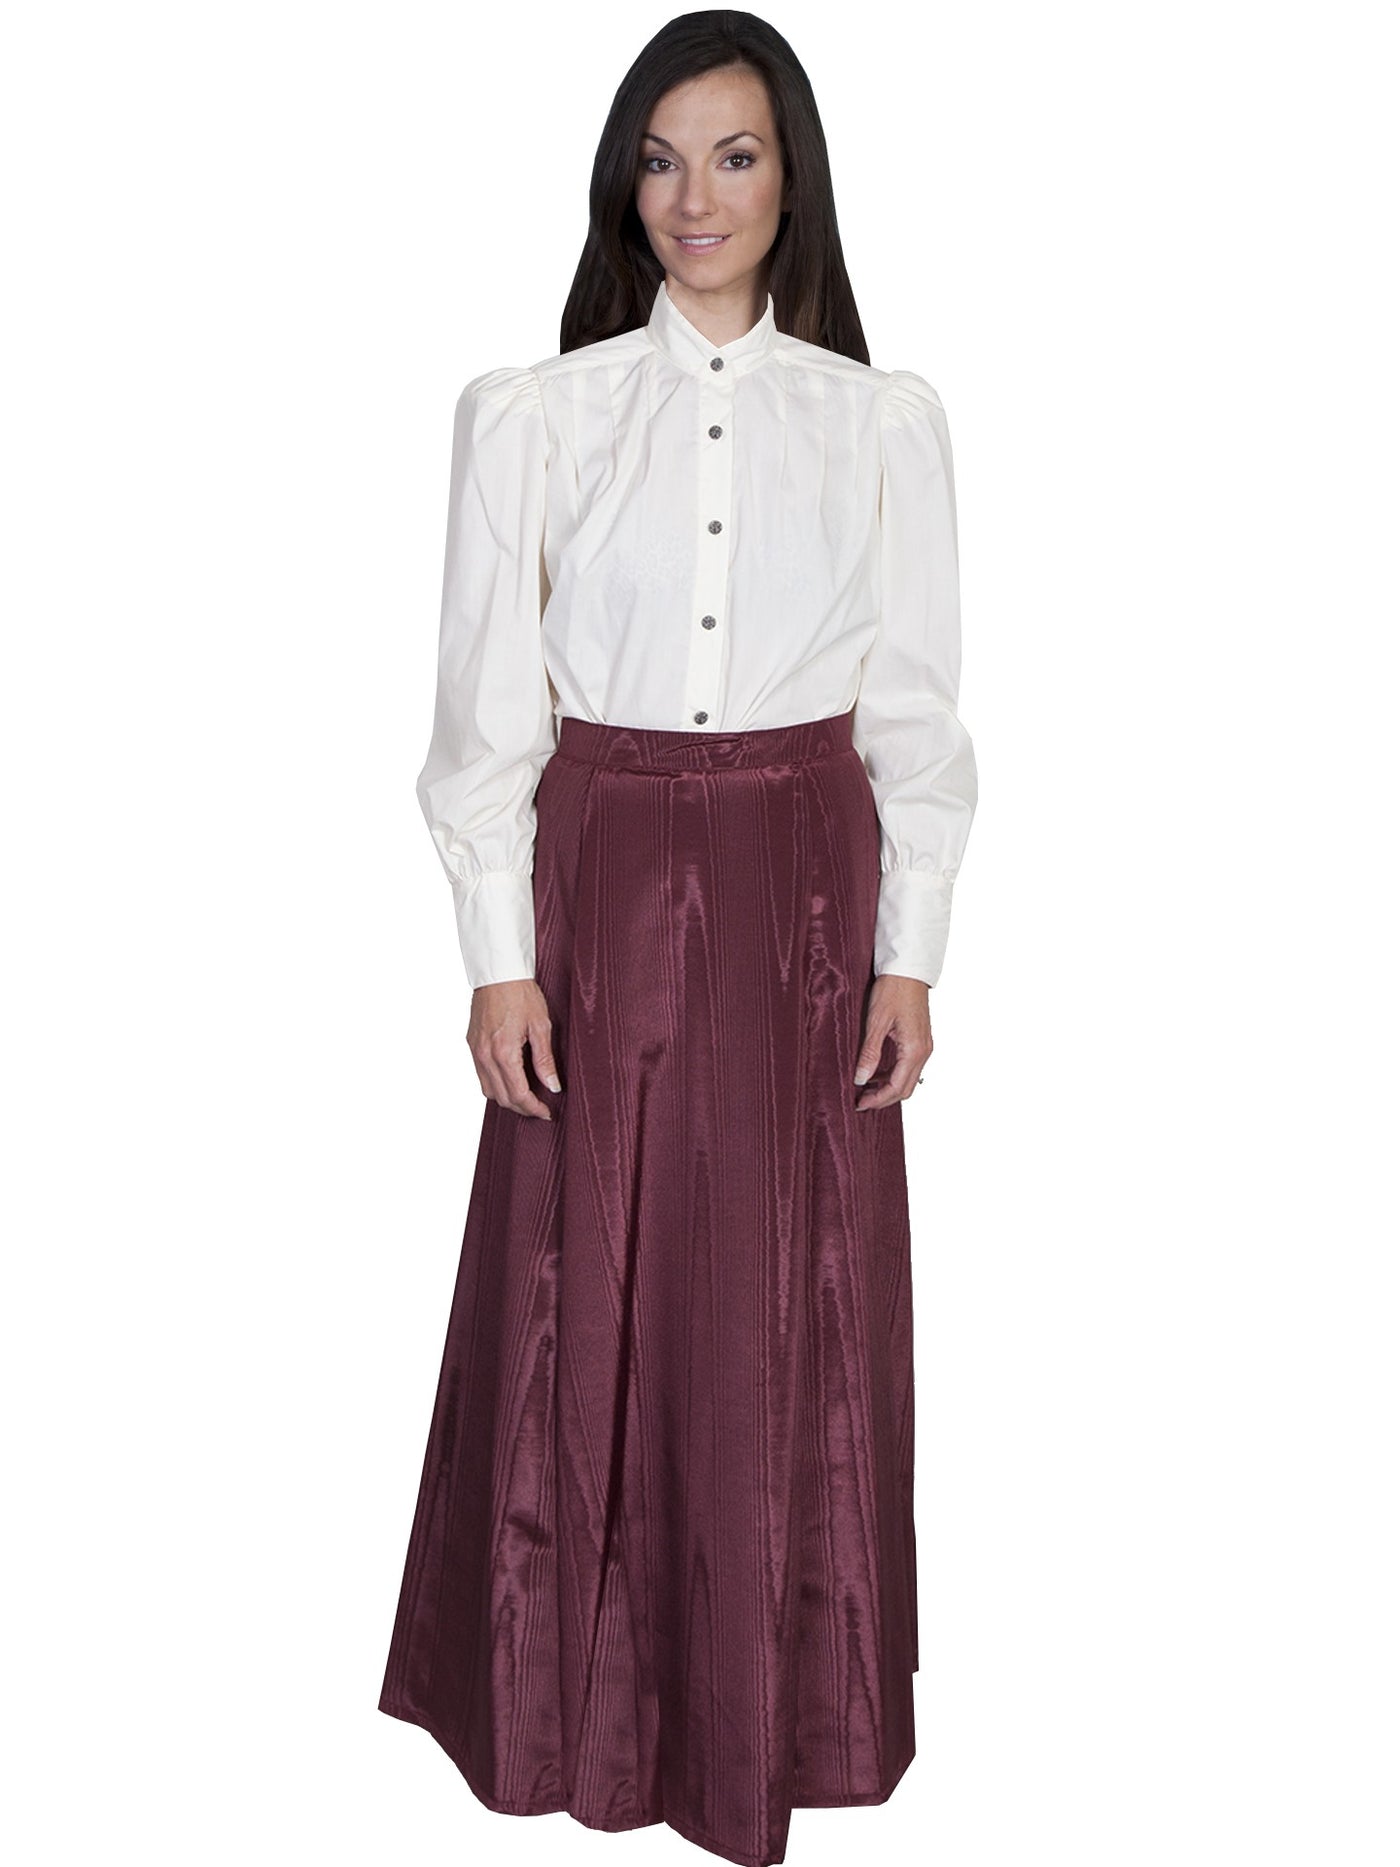 Victorian Style Five Gore Walking Skirt in Burgundy - SOLD OUT